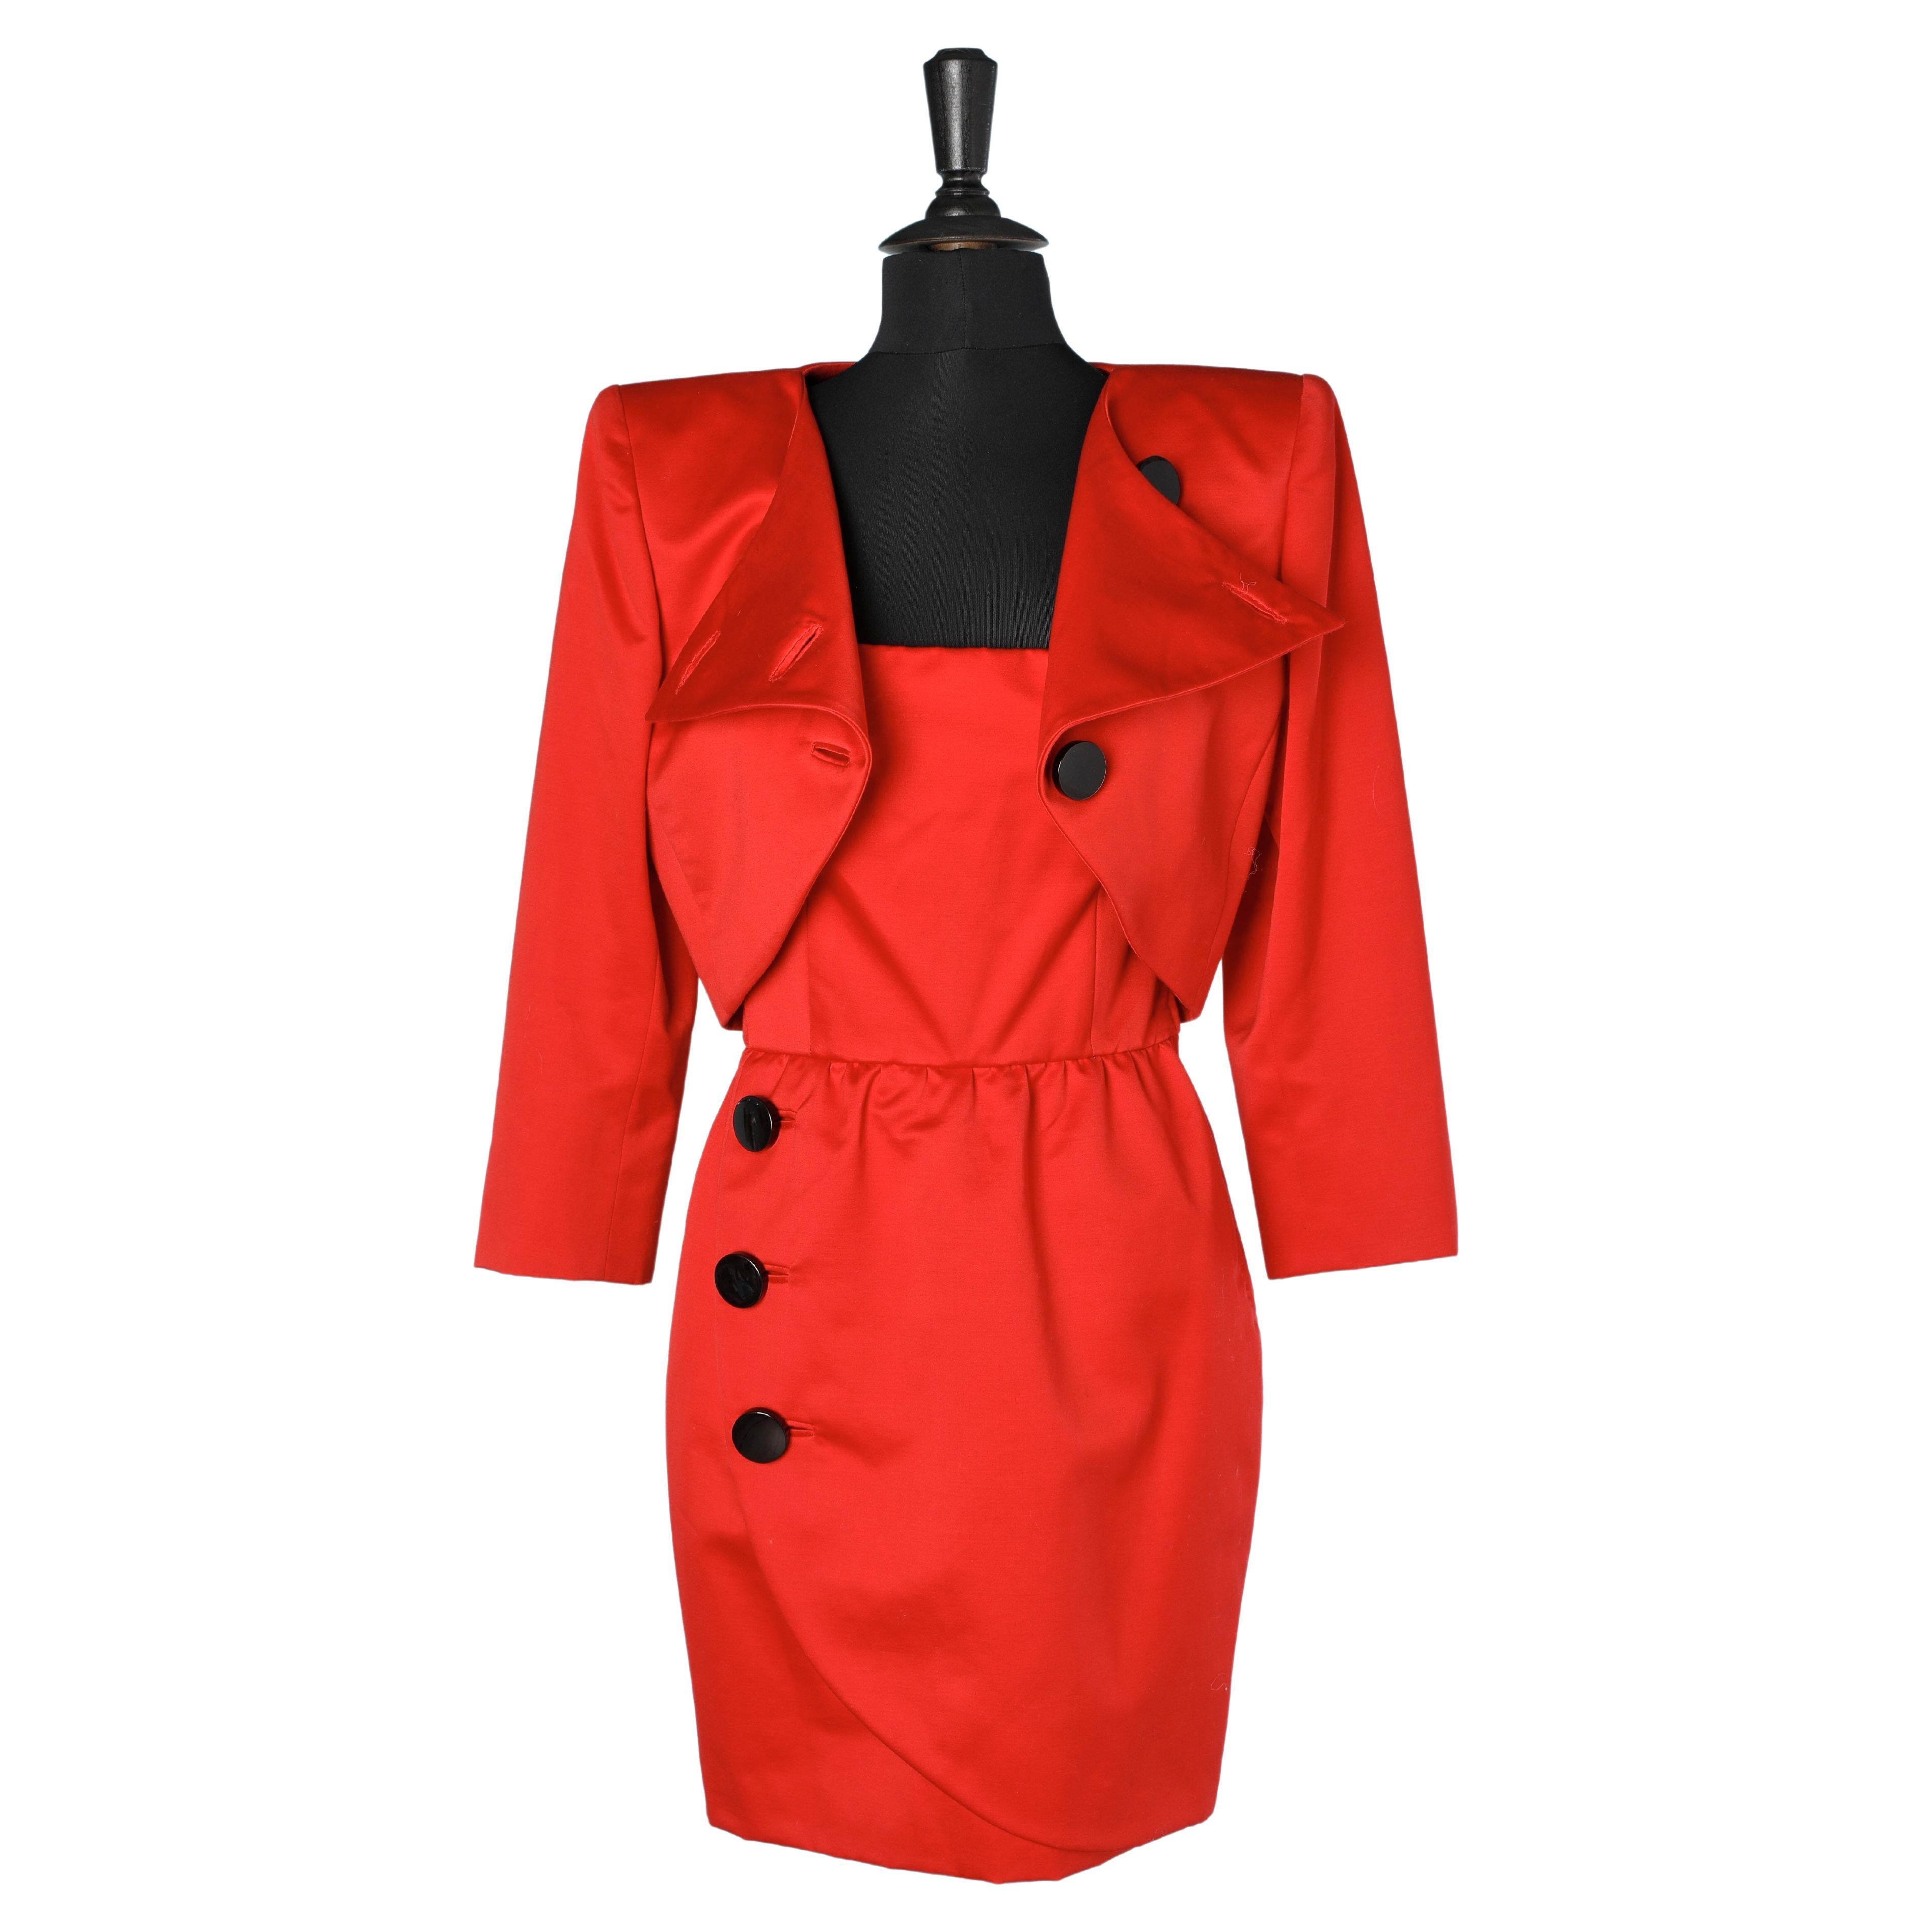 Red jacket and wrap bustier dress ensemble with black buttons Renata Circa 1980 For Sale